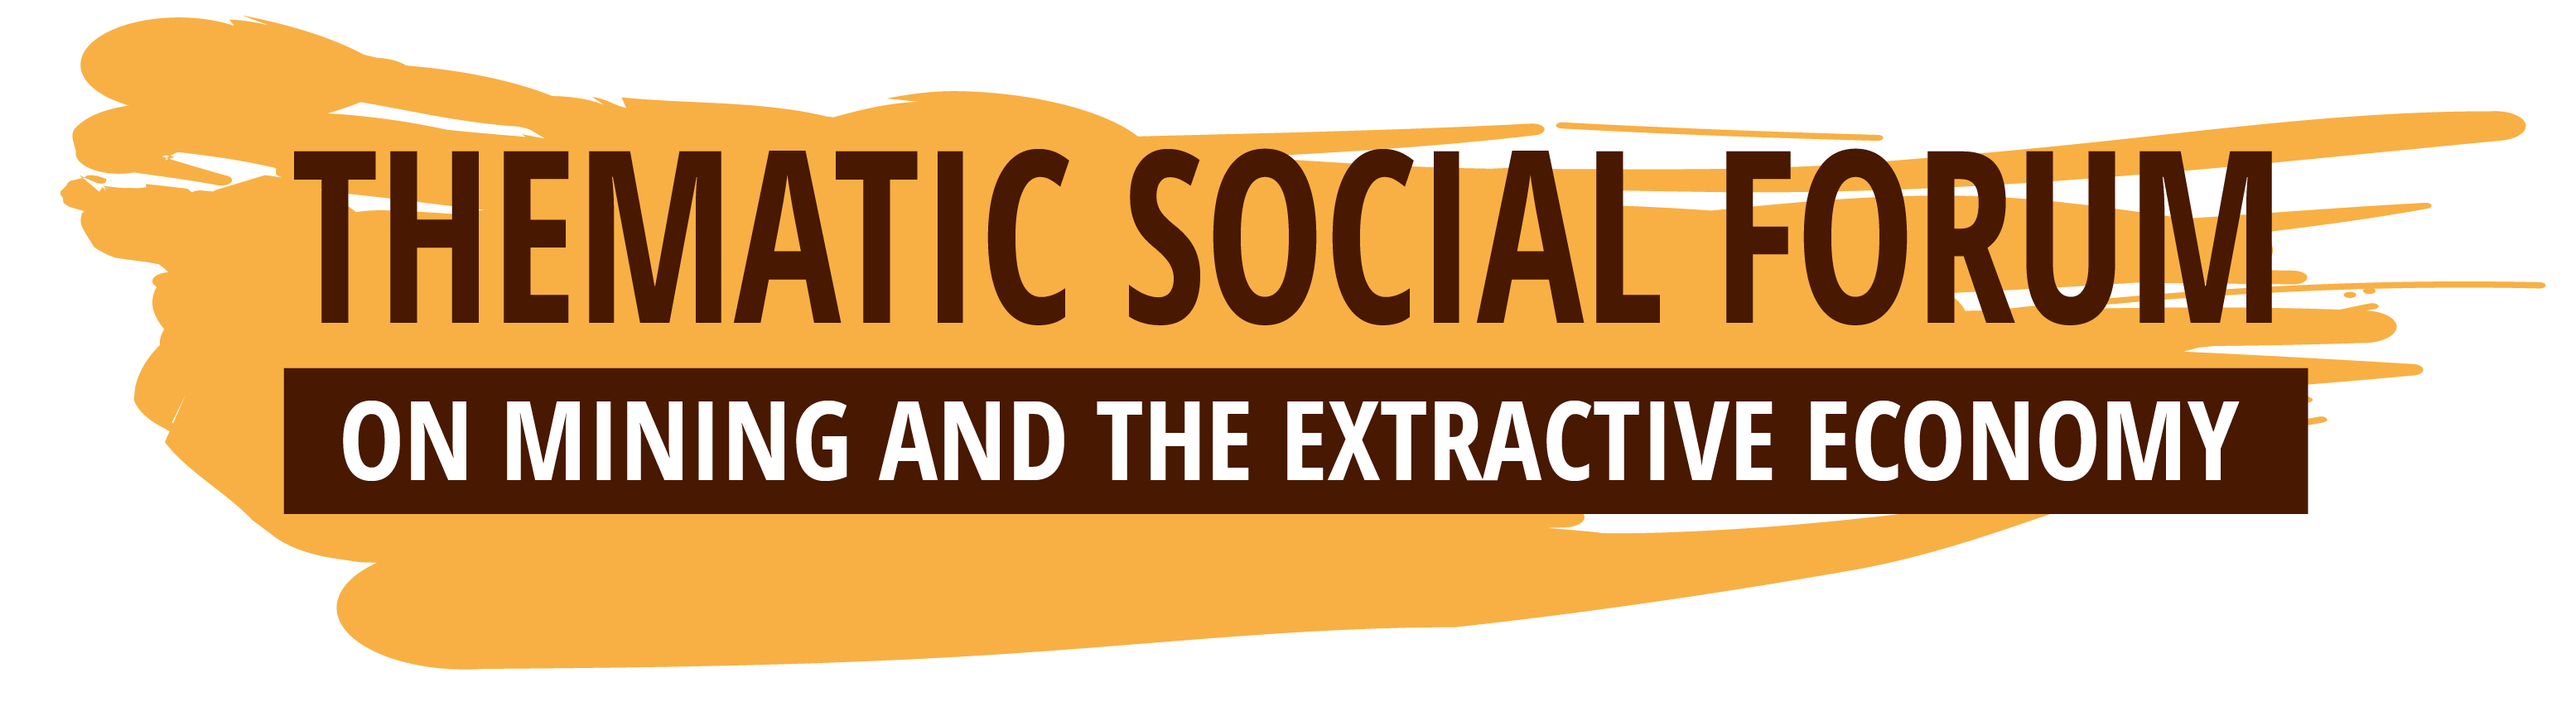 Thematic Social Forum